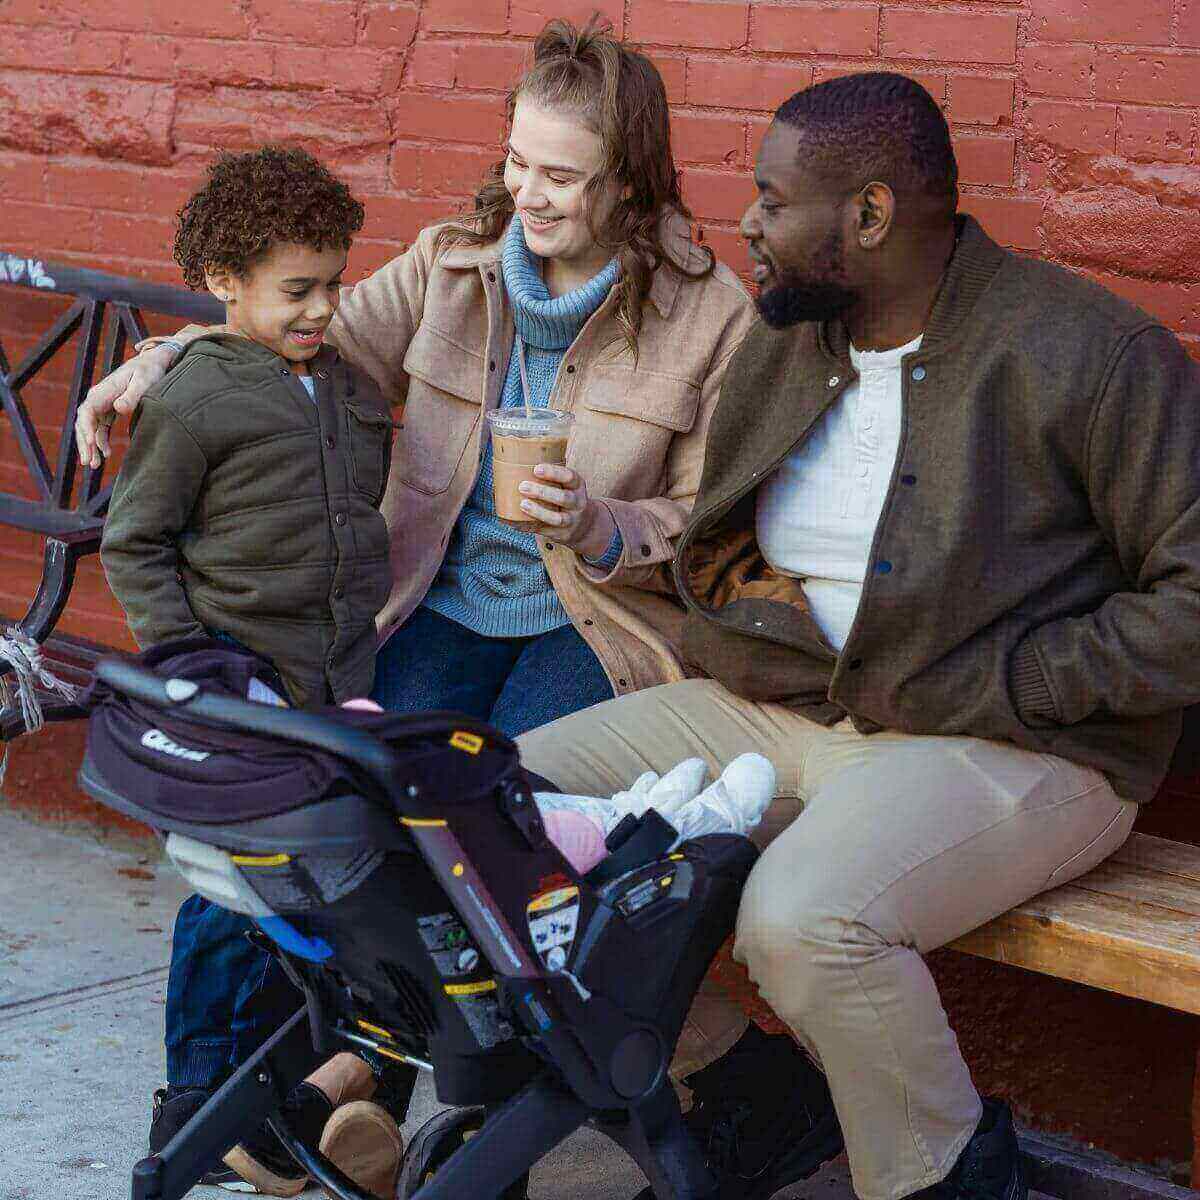 An African American man and a Caucasian woman are sitting on a bench with an older biracial boy and a newborn in a stroller in front of them